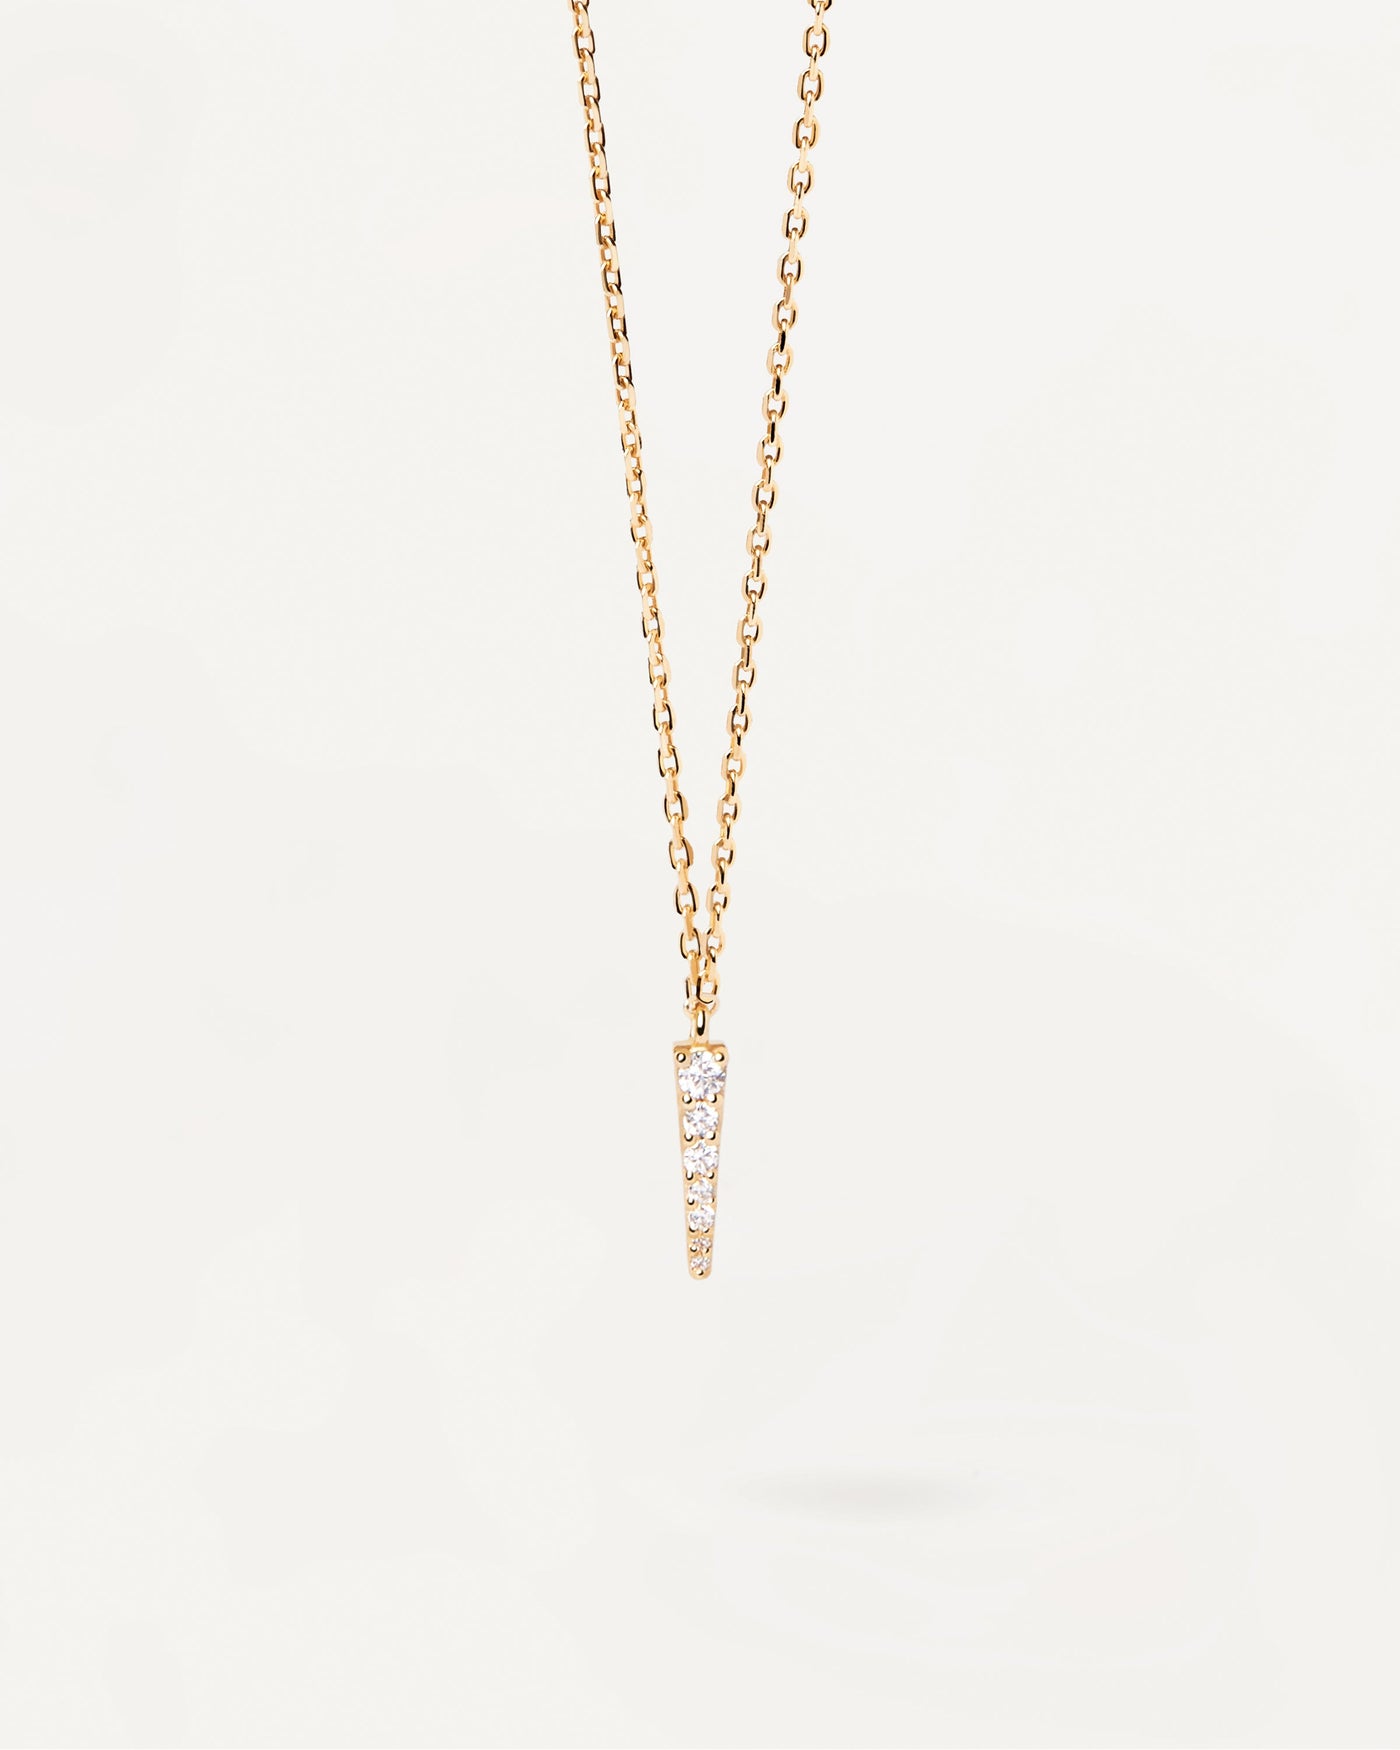 2023 Selection | Peak Necklace. Gold-plated silver necklace with white zirconia pendant in tip shape. Get the latest arrival from PDPAOLA. Place your order safely and get this Best Seller. Free Shipping.